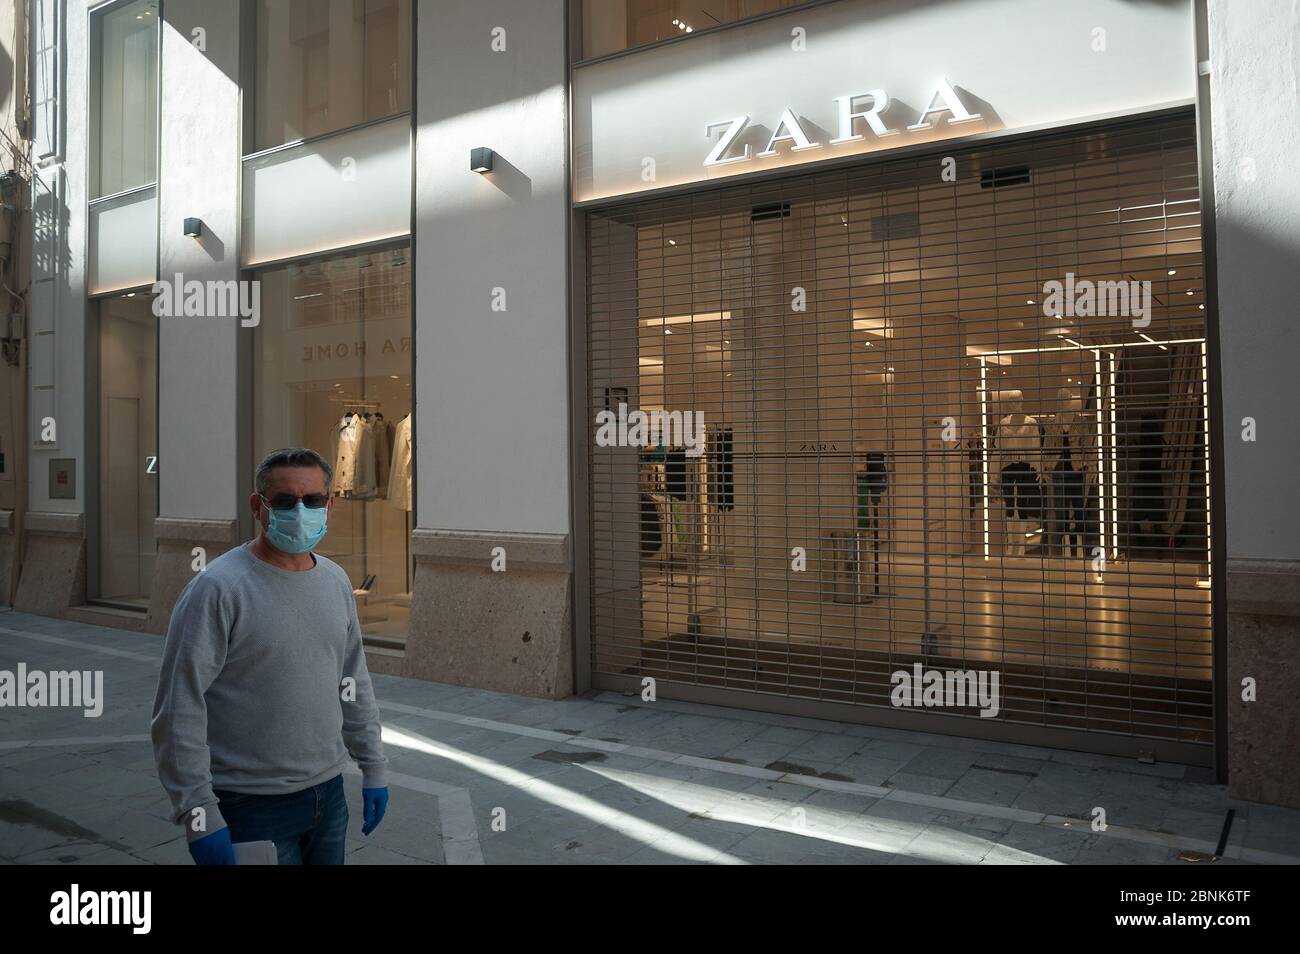 Zara Store Madrid Spain High Resolution Stock Photography and Images - Alamy